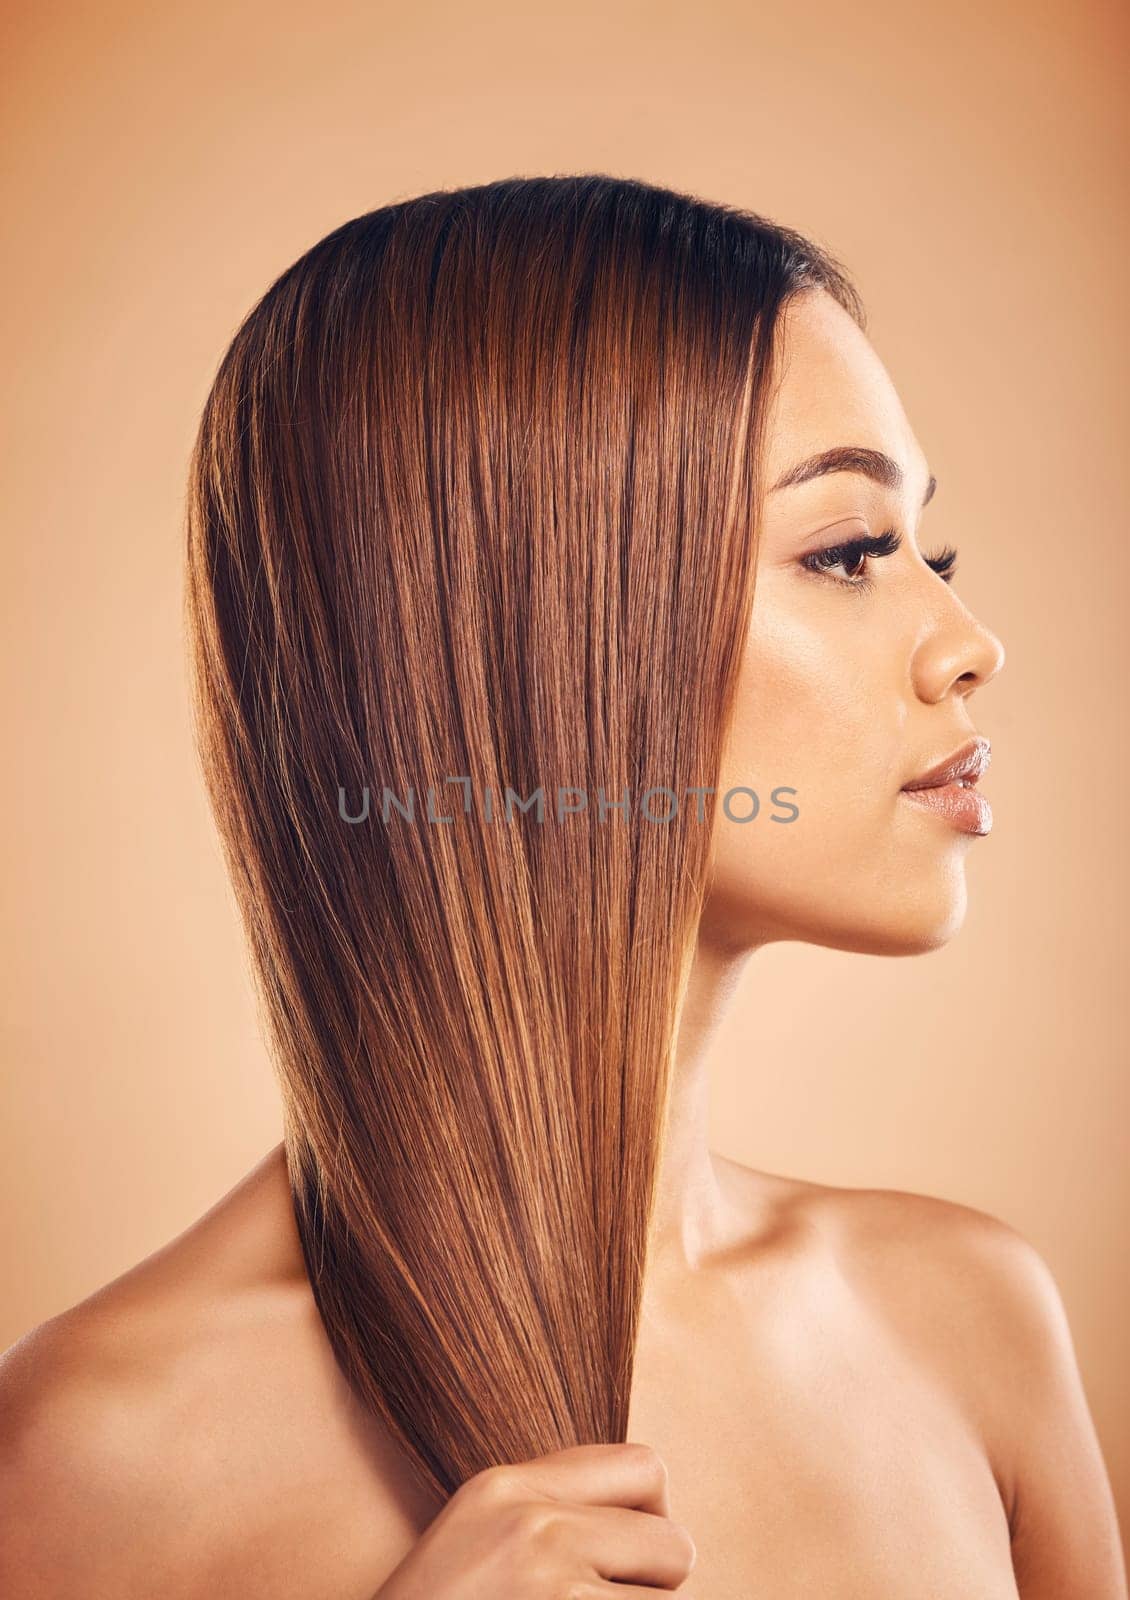 Woman, hair and beauty with hairstyle and profile, haircare and keratin treatment isolated on studio background. Female model with highlights, color and cosmetic care, texture and growth with shine.